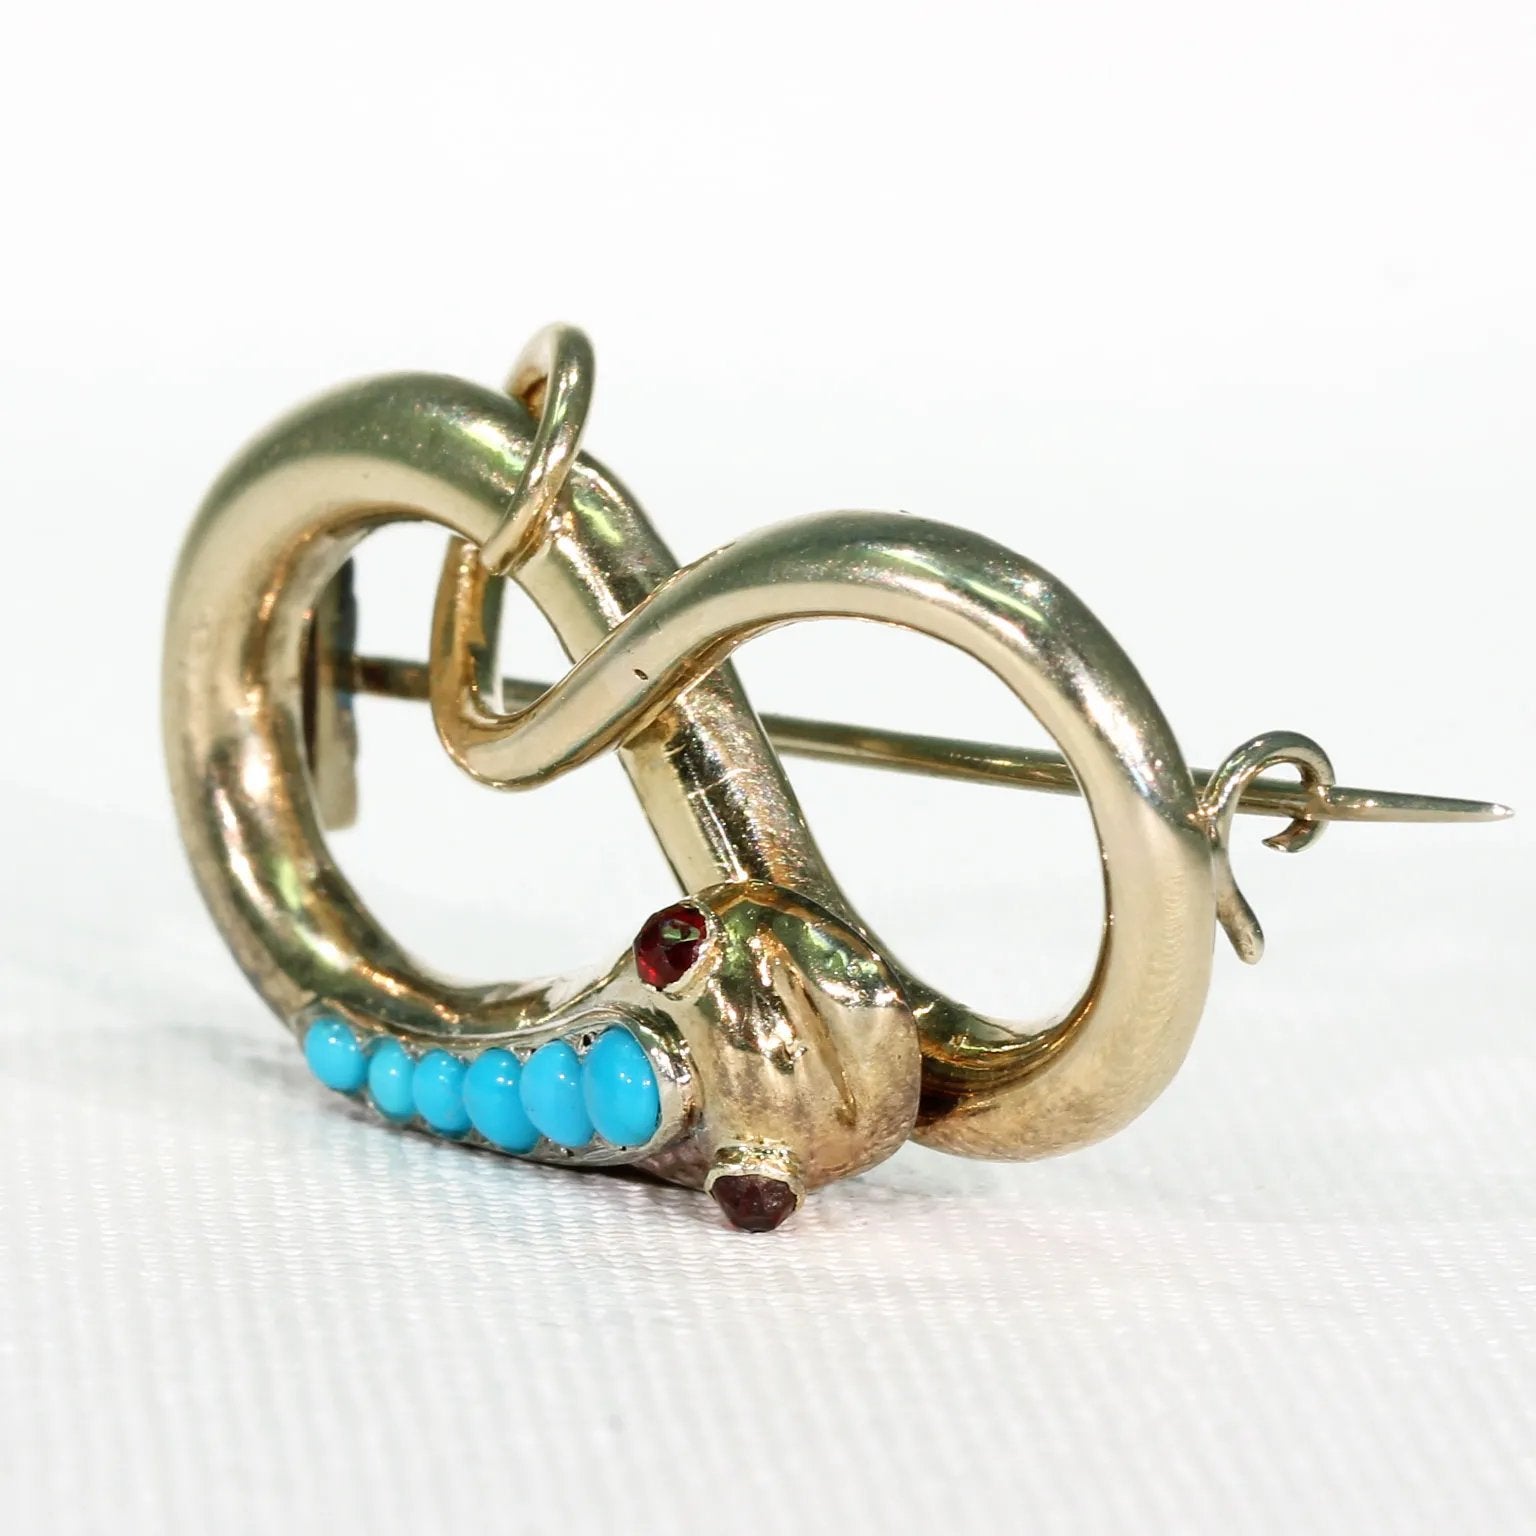 Antique Victorian Turquoise Garnet Gold Snake Brooch Pin